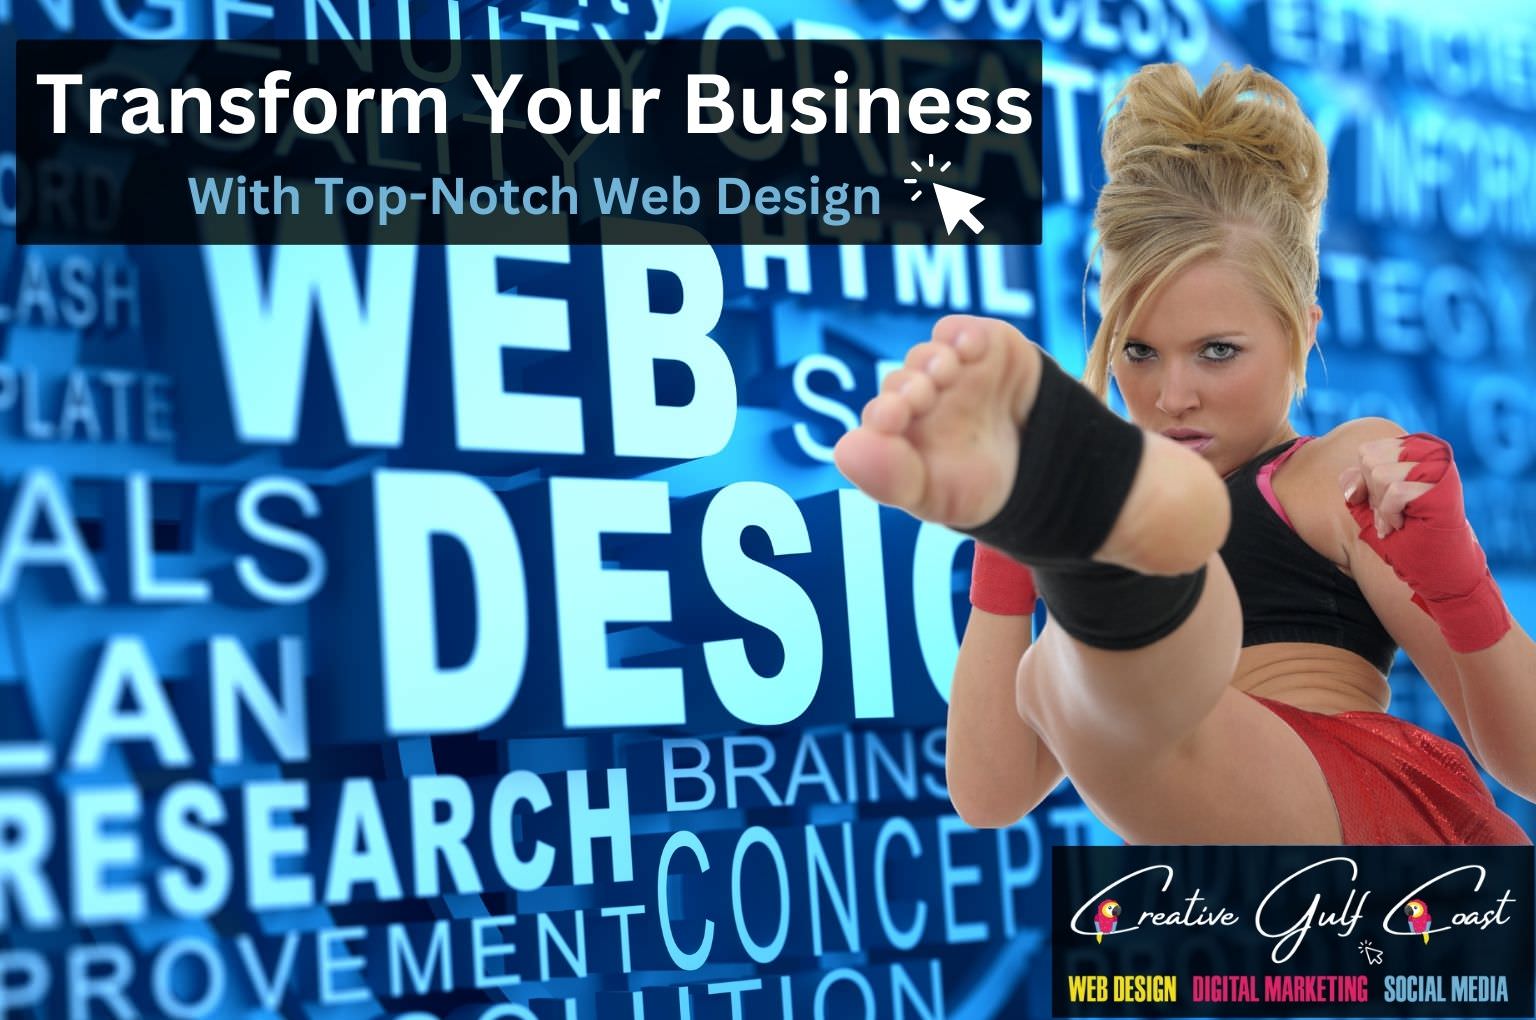 Transform your business with top notch web design made in Florida in Tampa Bay by Creative Gulf Coast Digital Marketing